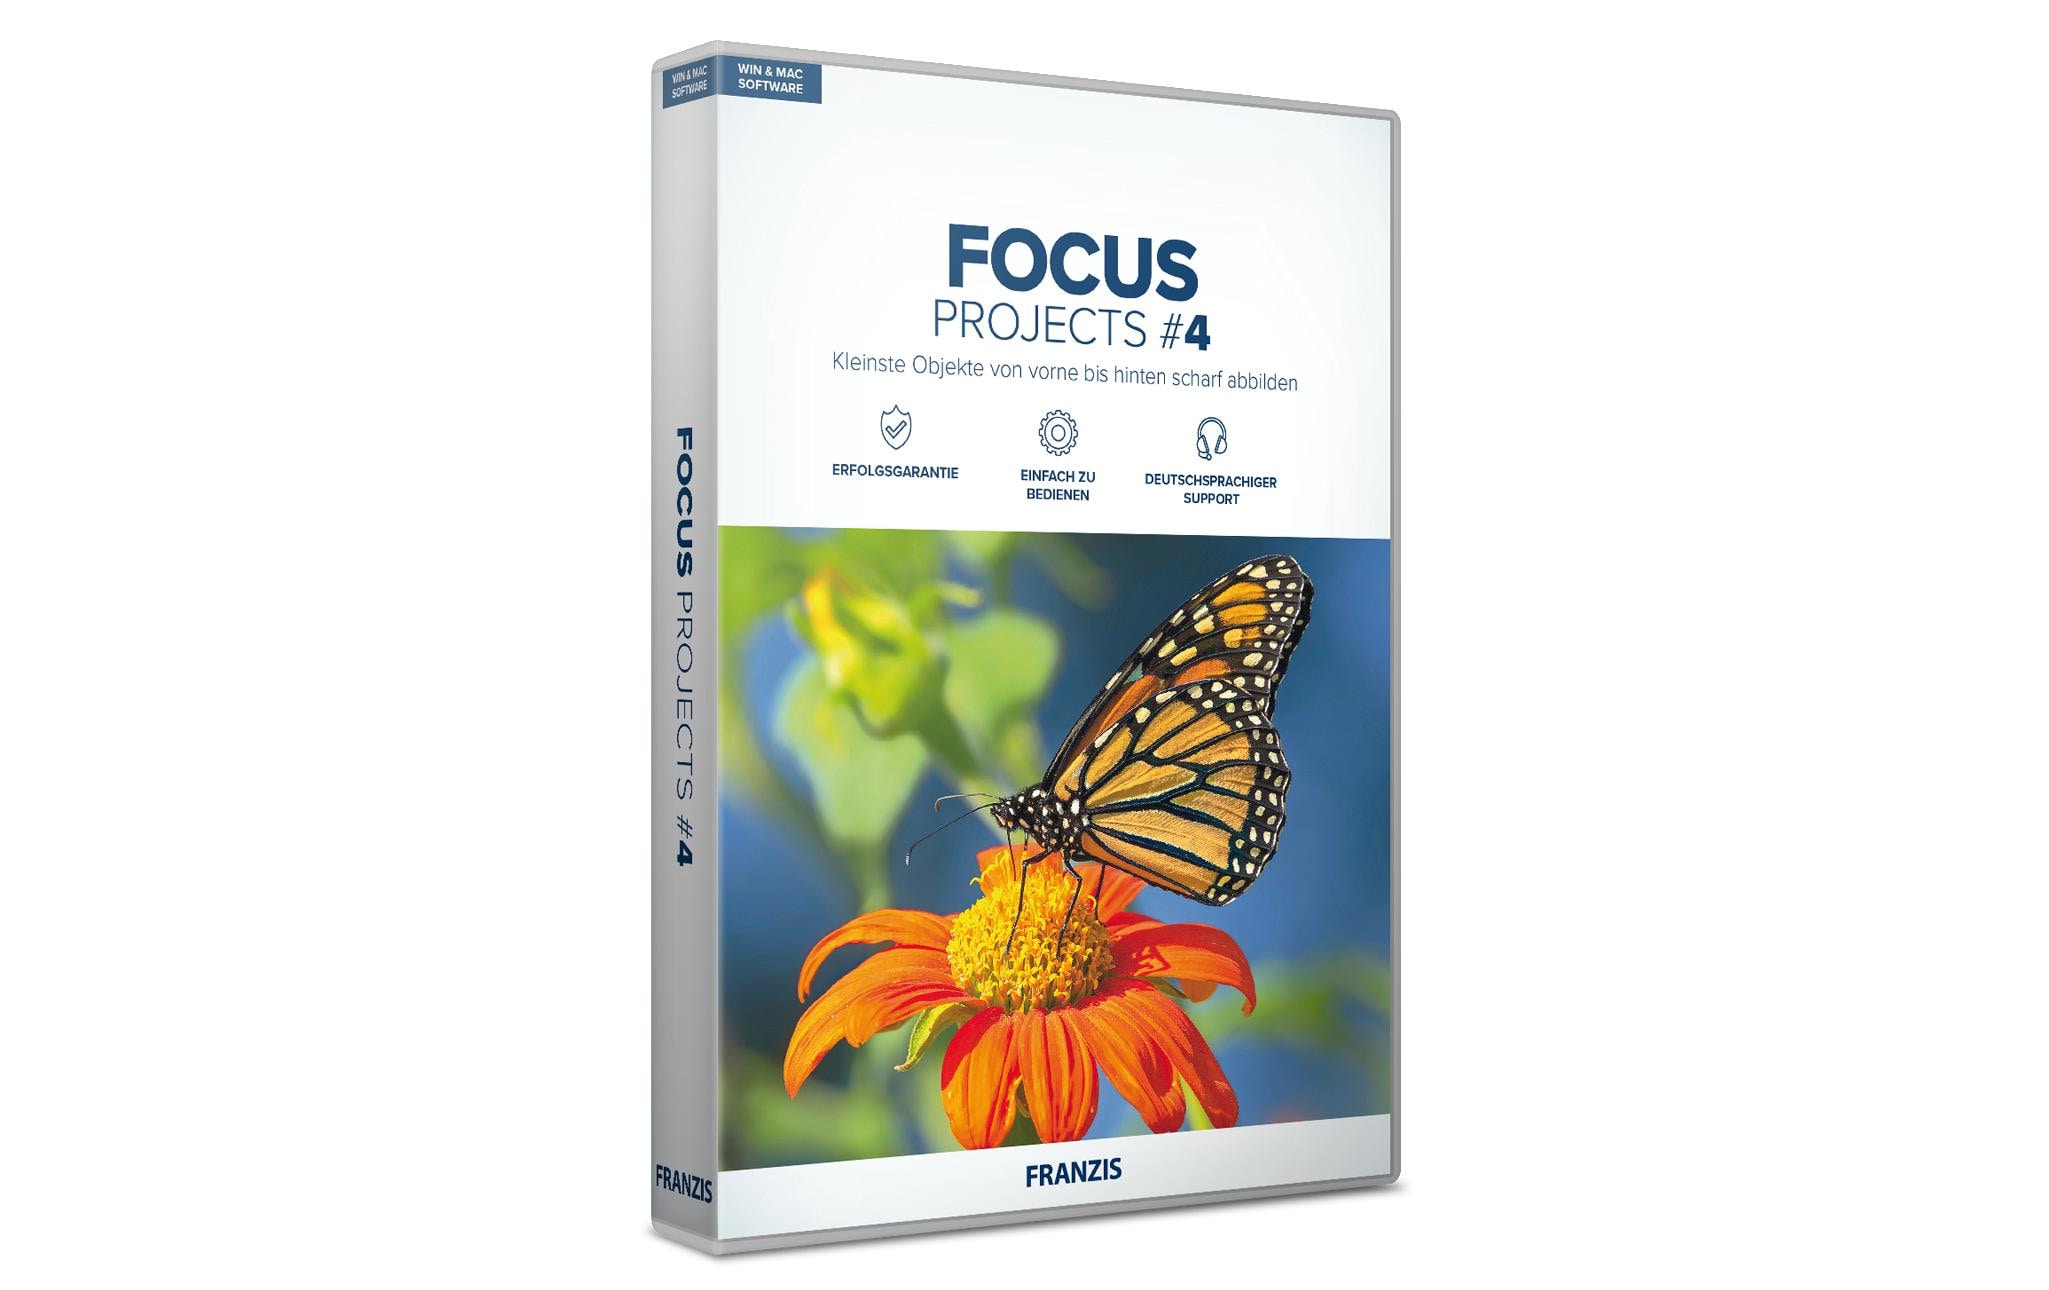 Franzis FOCUS Projects 4